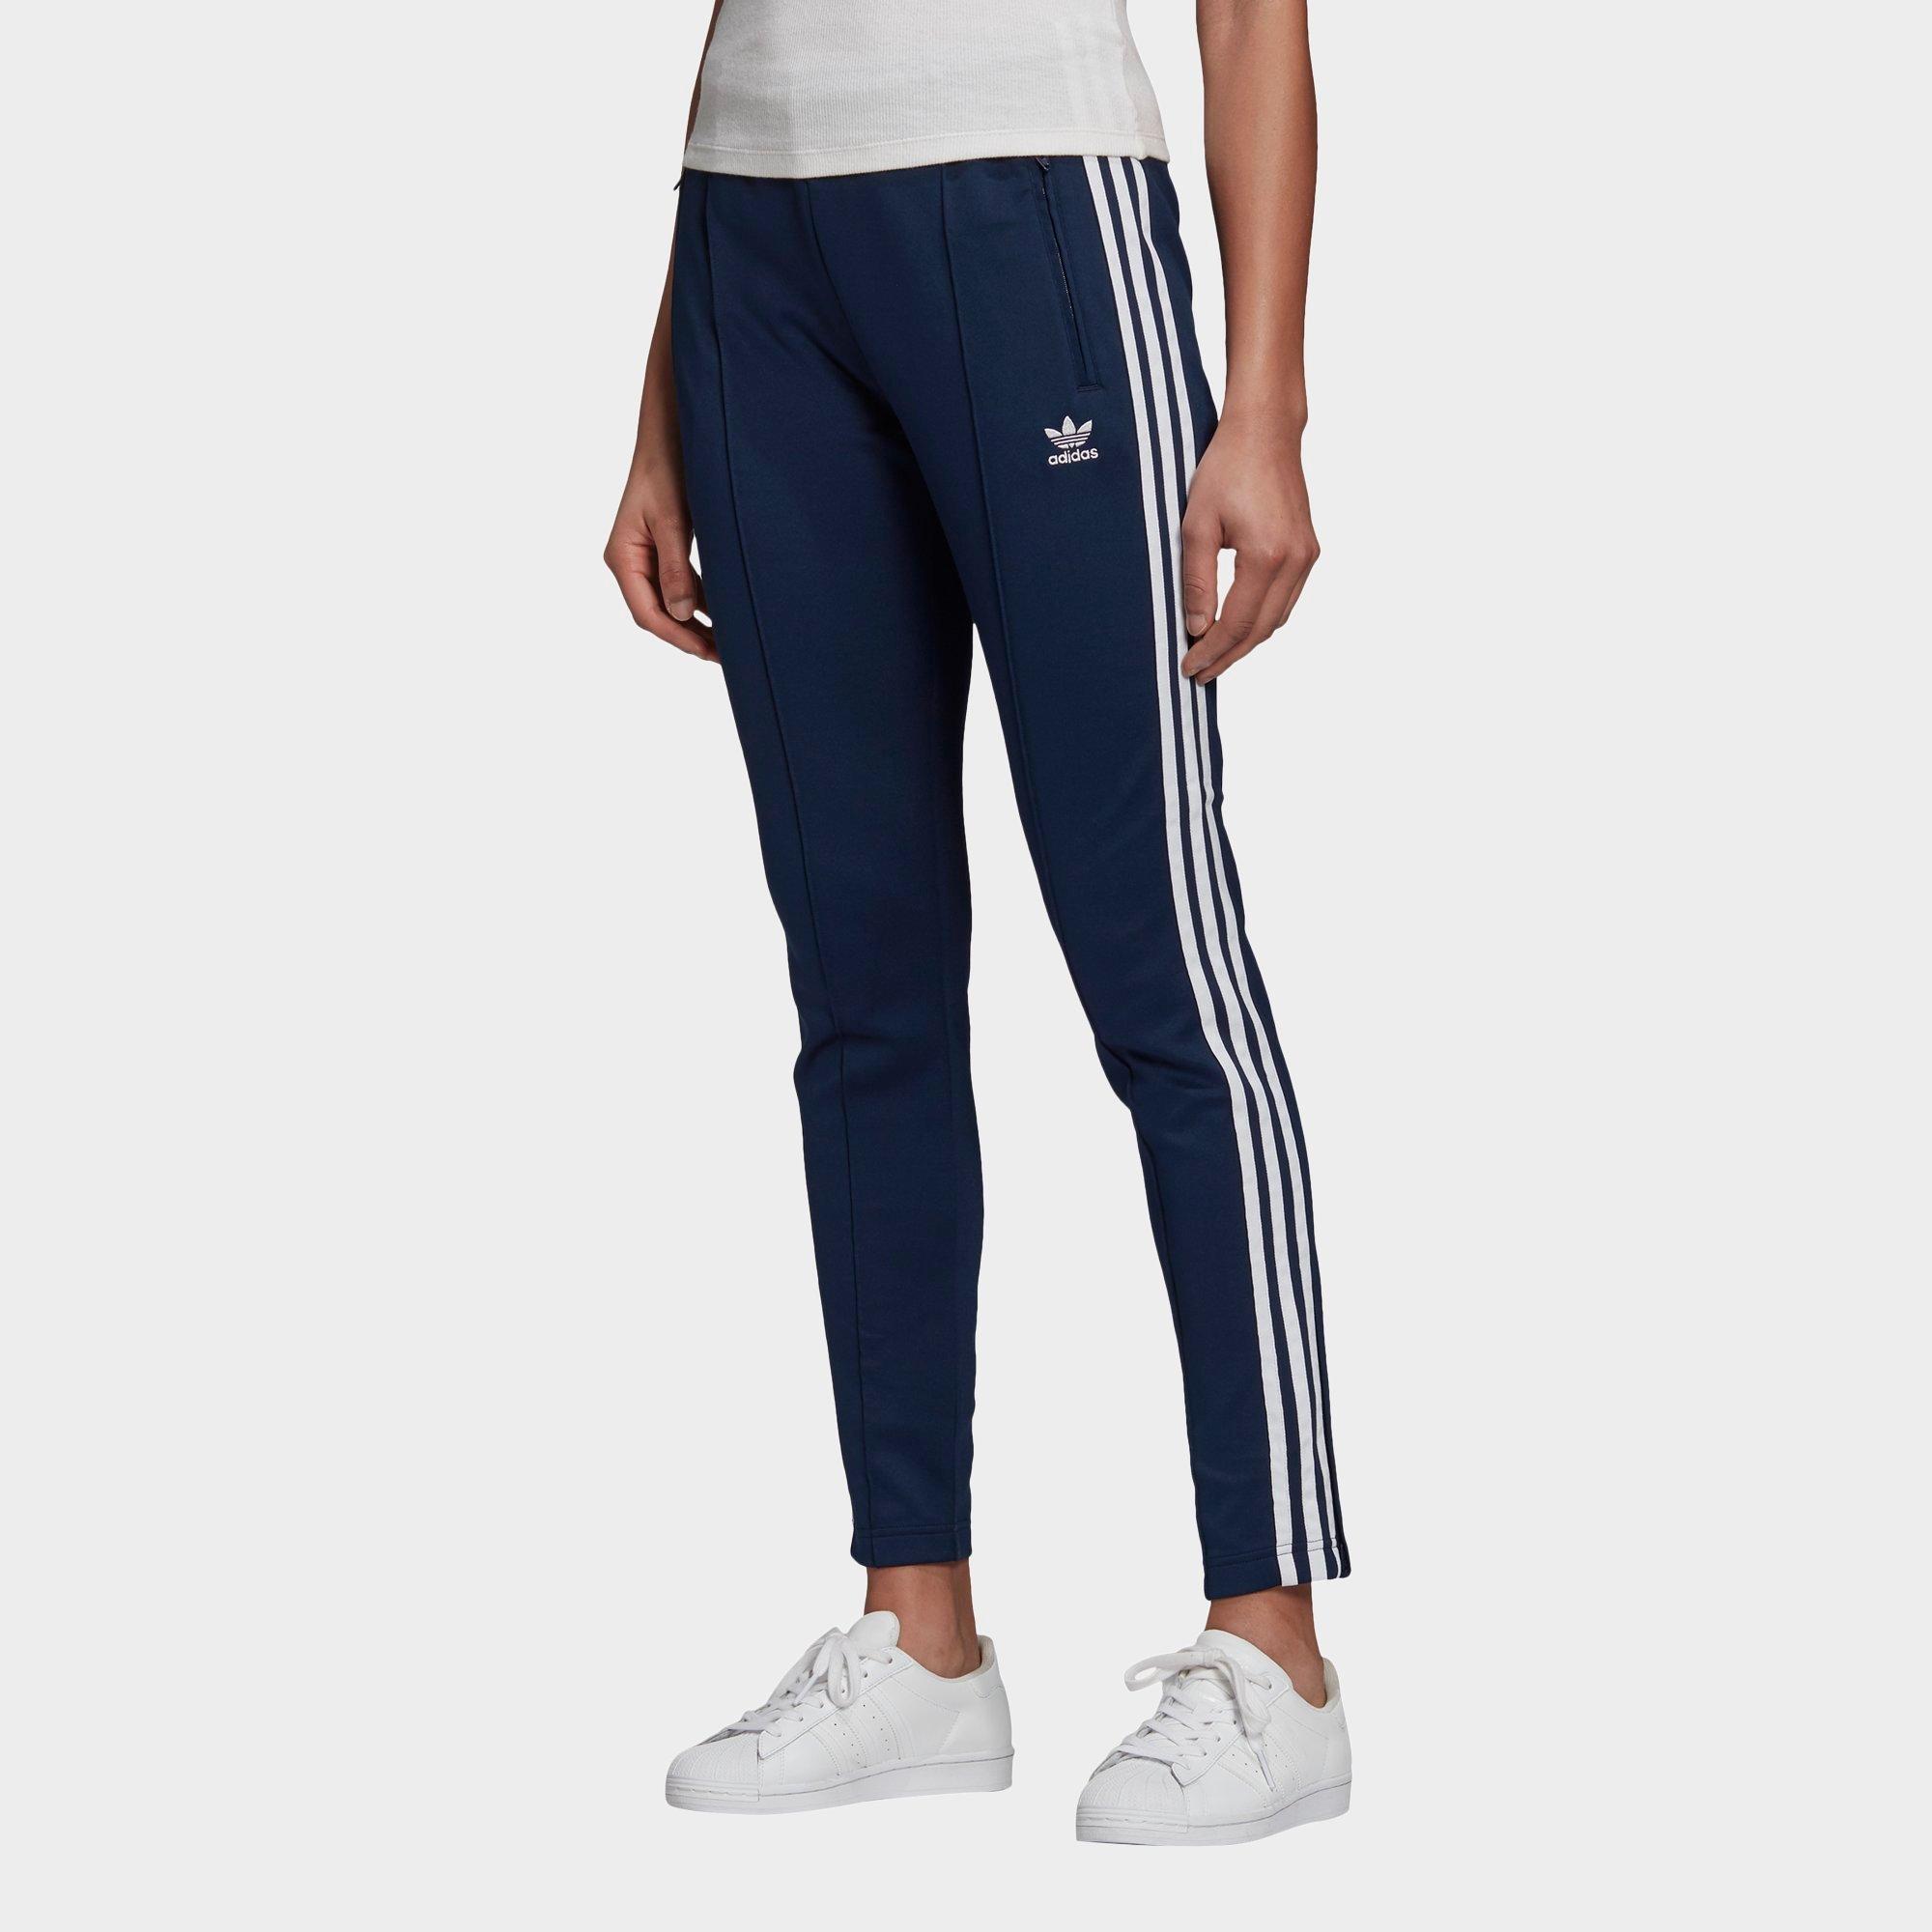 adidas fitted sweatpants